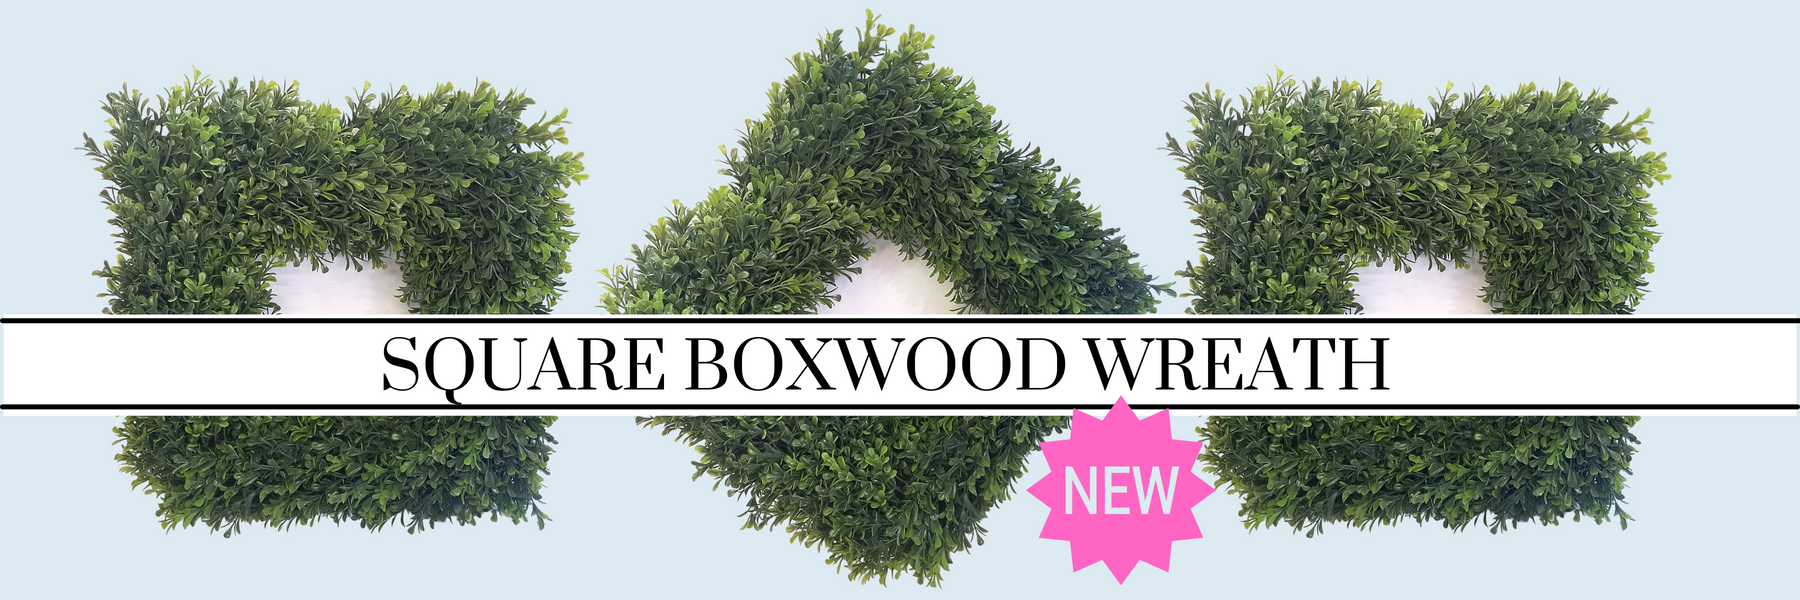 New! Square Boxwood Wreaths Just Arrived!